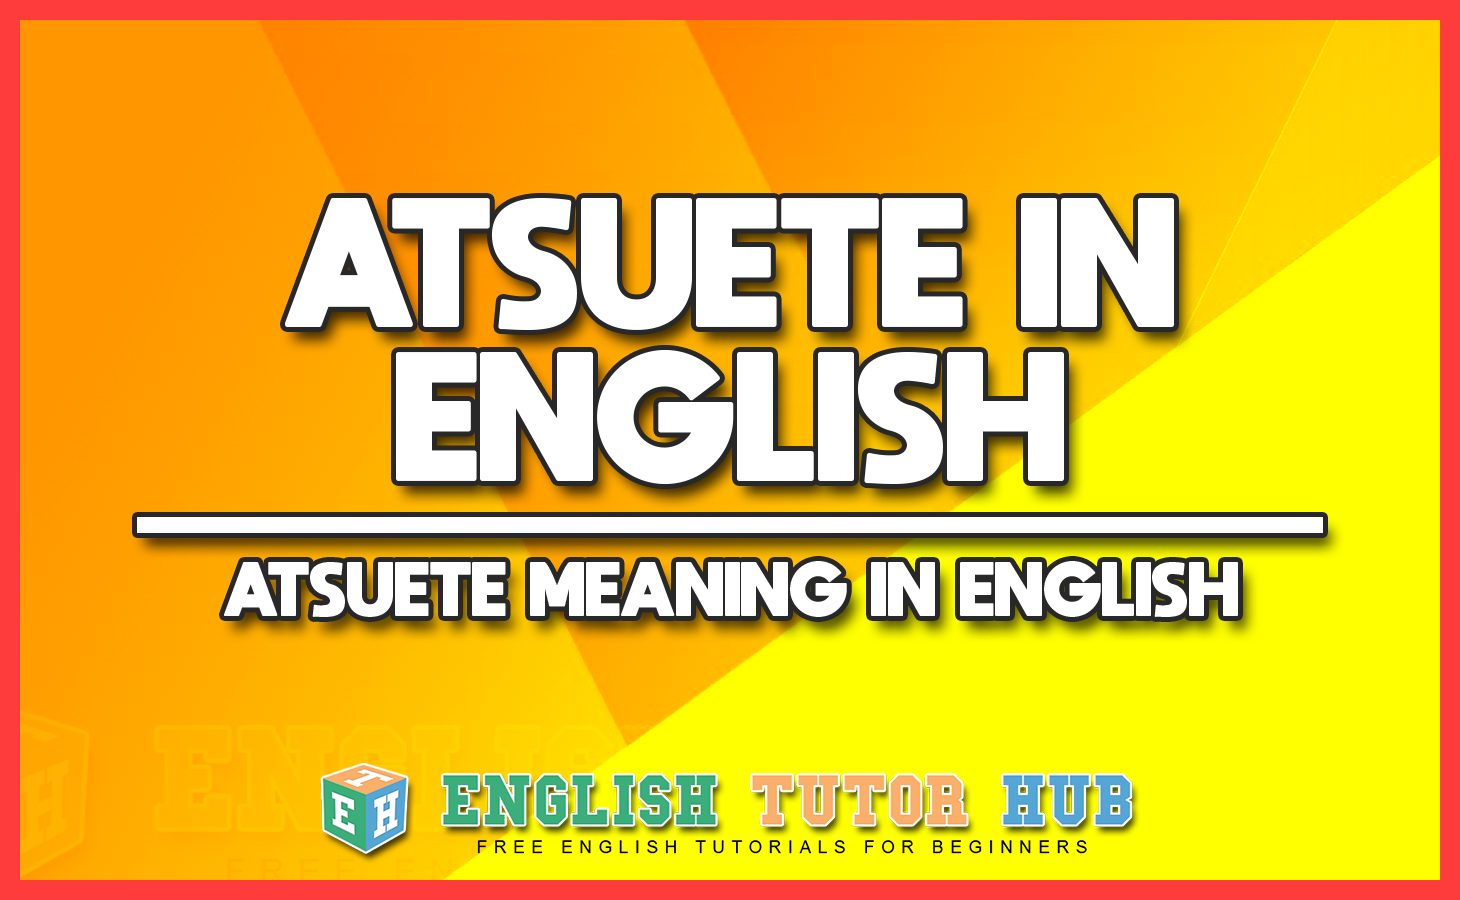 ATSUETE IN ENGLISH - ATSUETE MEANING IN ENGLISH